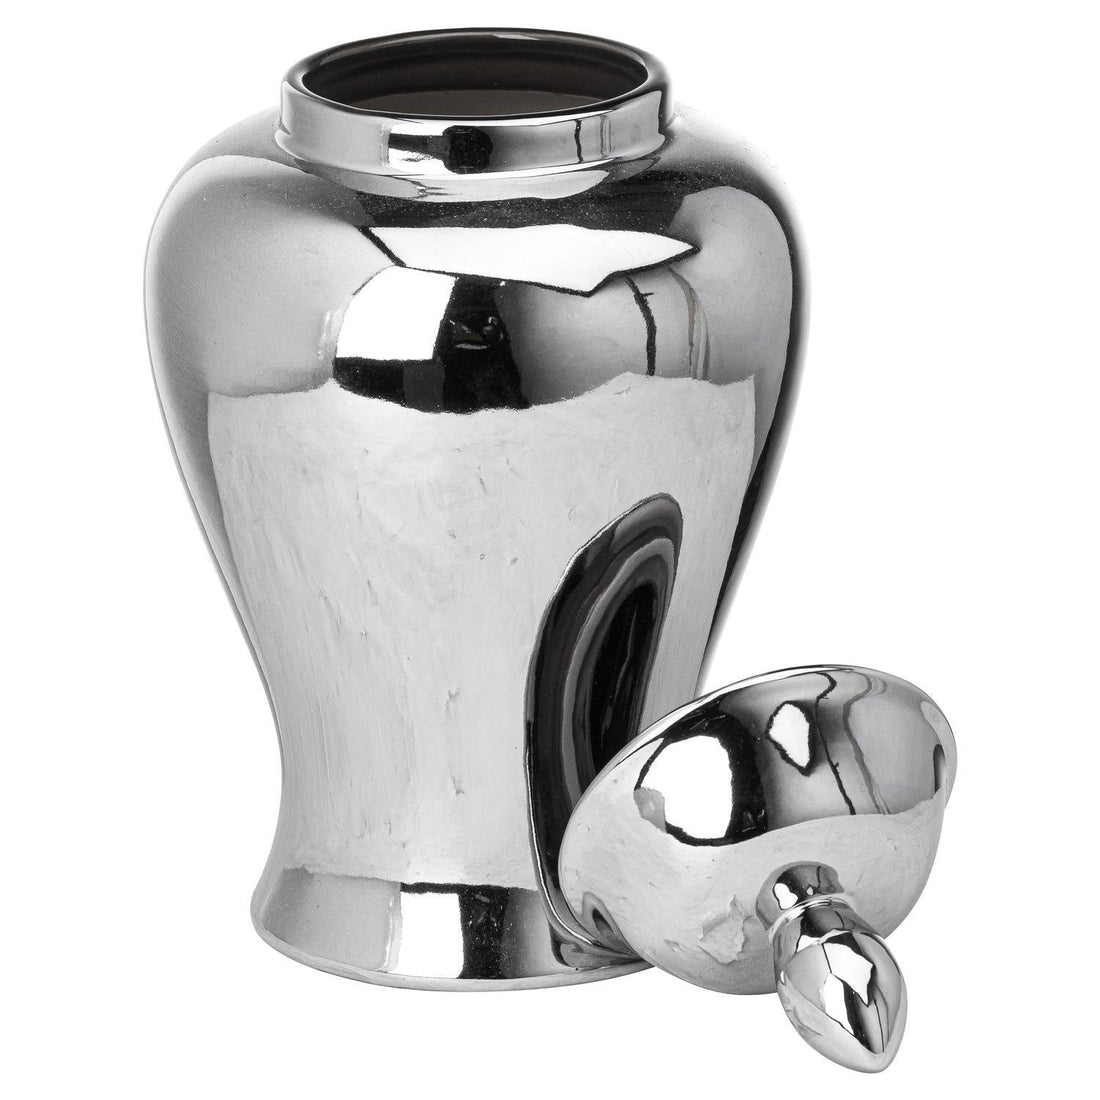 Chrome Ginger Jar - £49.95 - Gifts & Accessories > Ornaments > Ornaments 